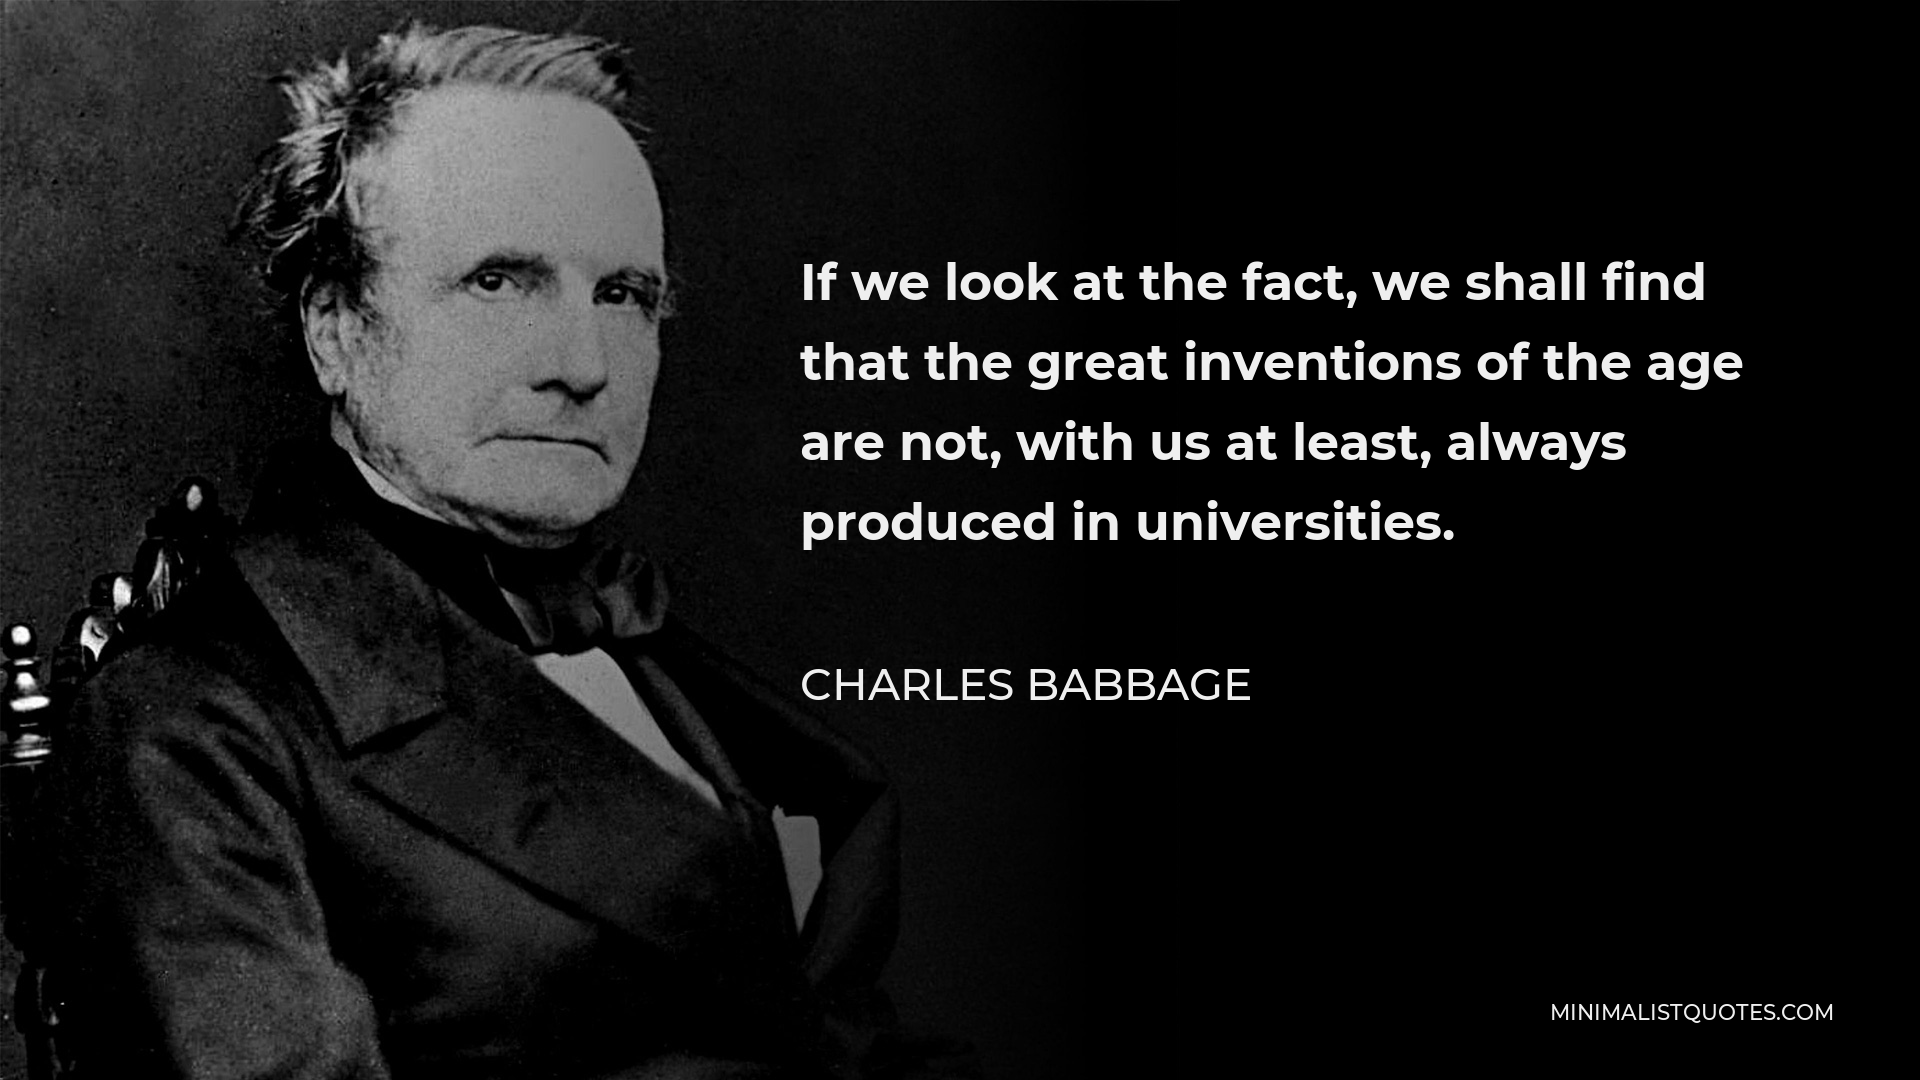 Charles Babbage Quote - If we look at the fact, we shall find that the great inventions of the age are not, with us at least, always produced in universities.